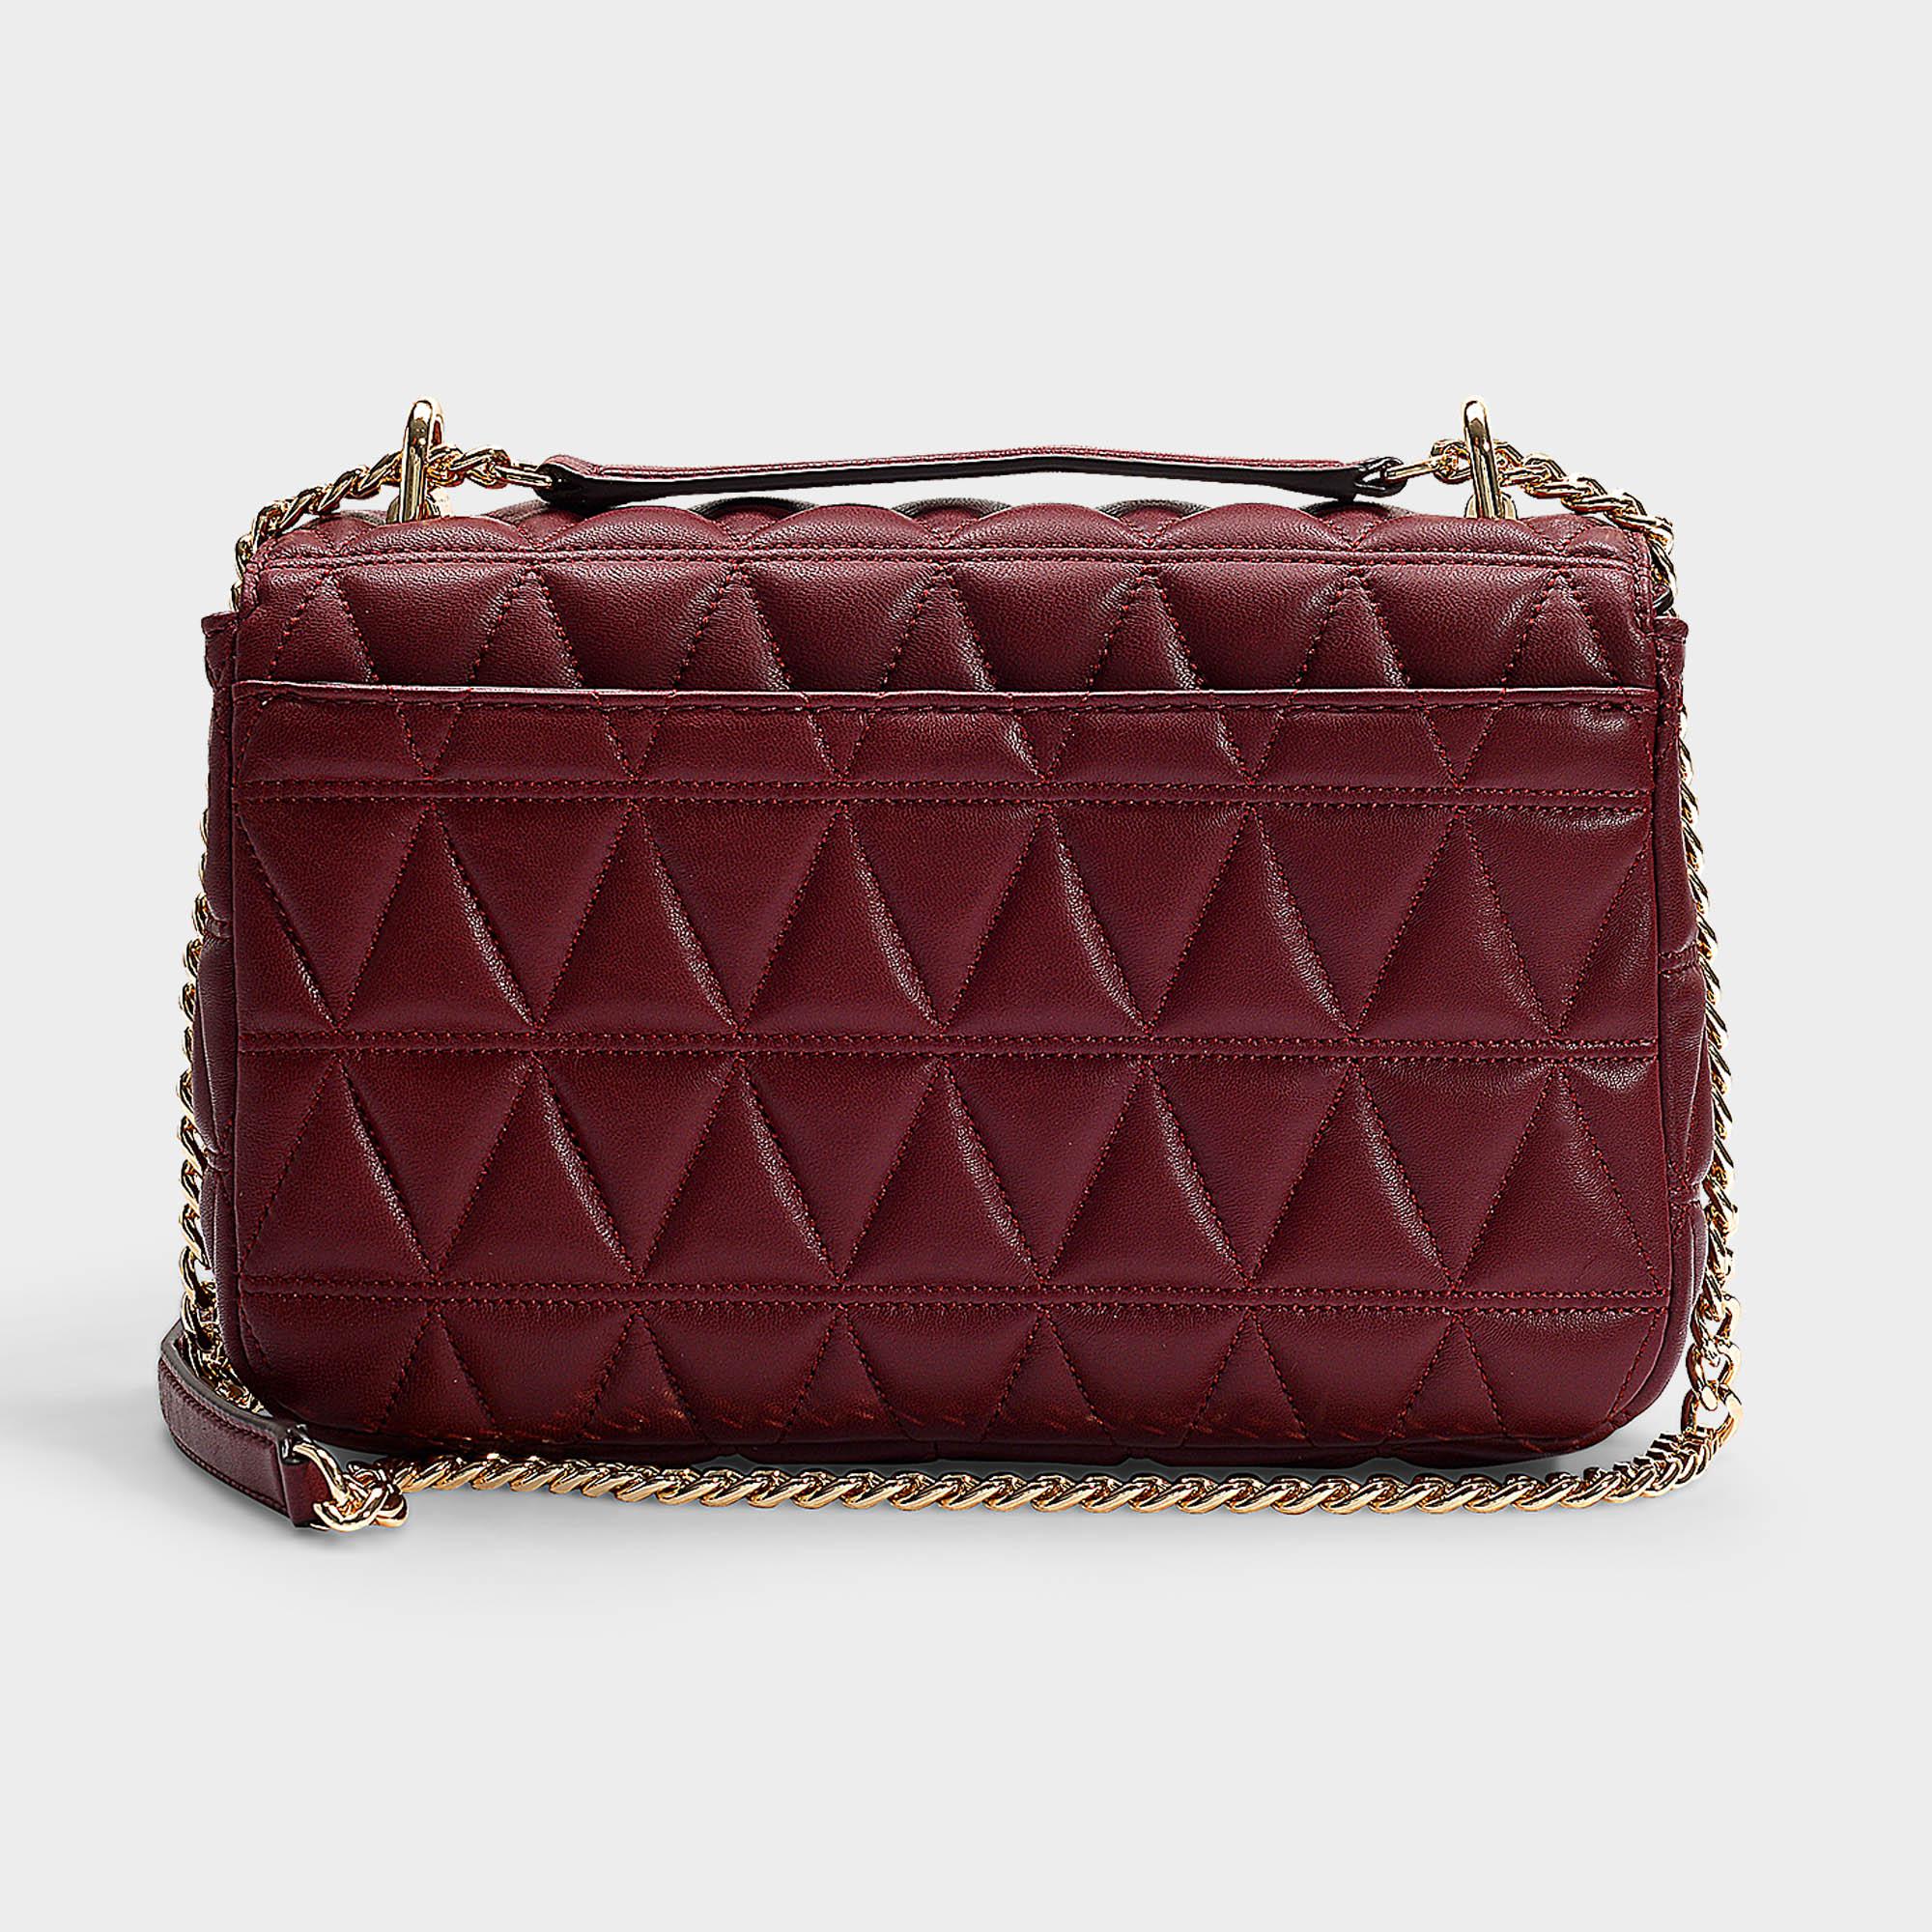 Michael Kors Small Chain Item Red Quilted Shoulder Flap Handbag (Red), Women's (leather)